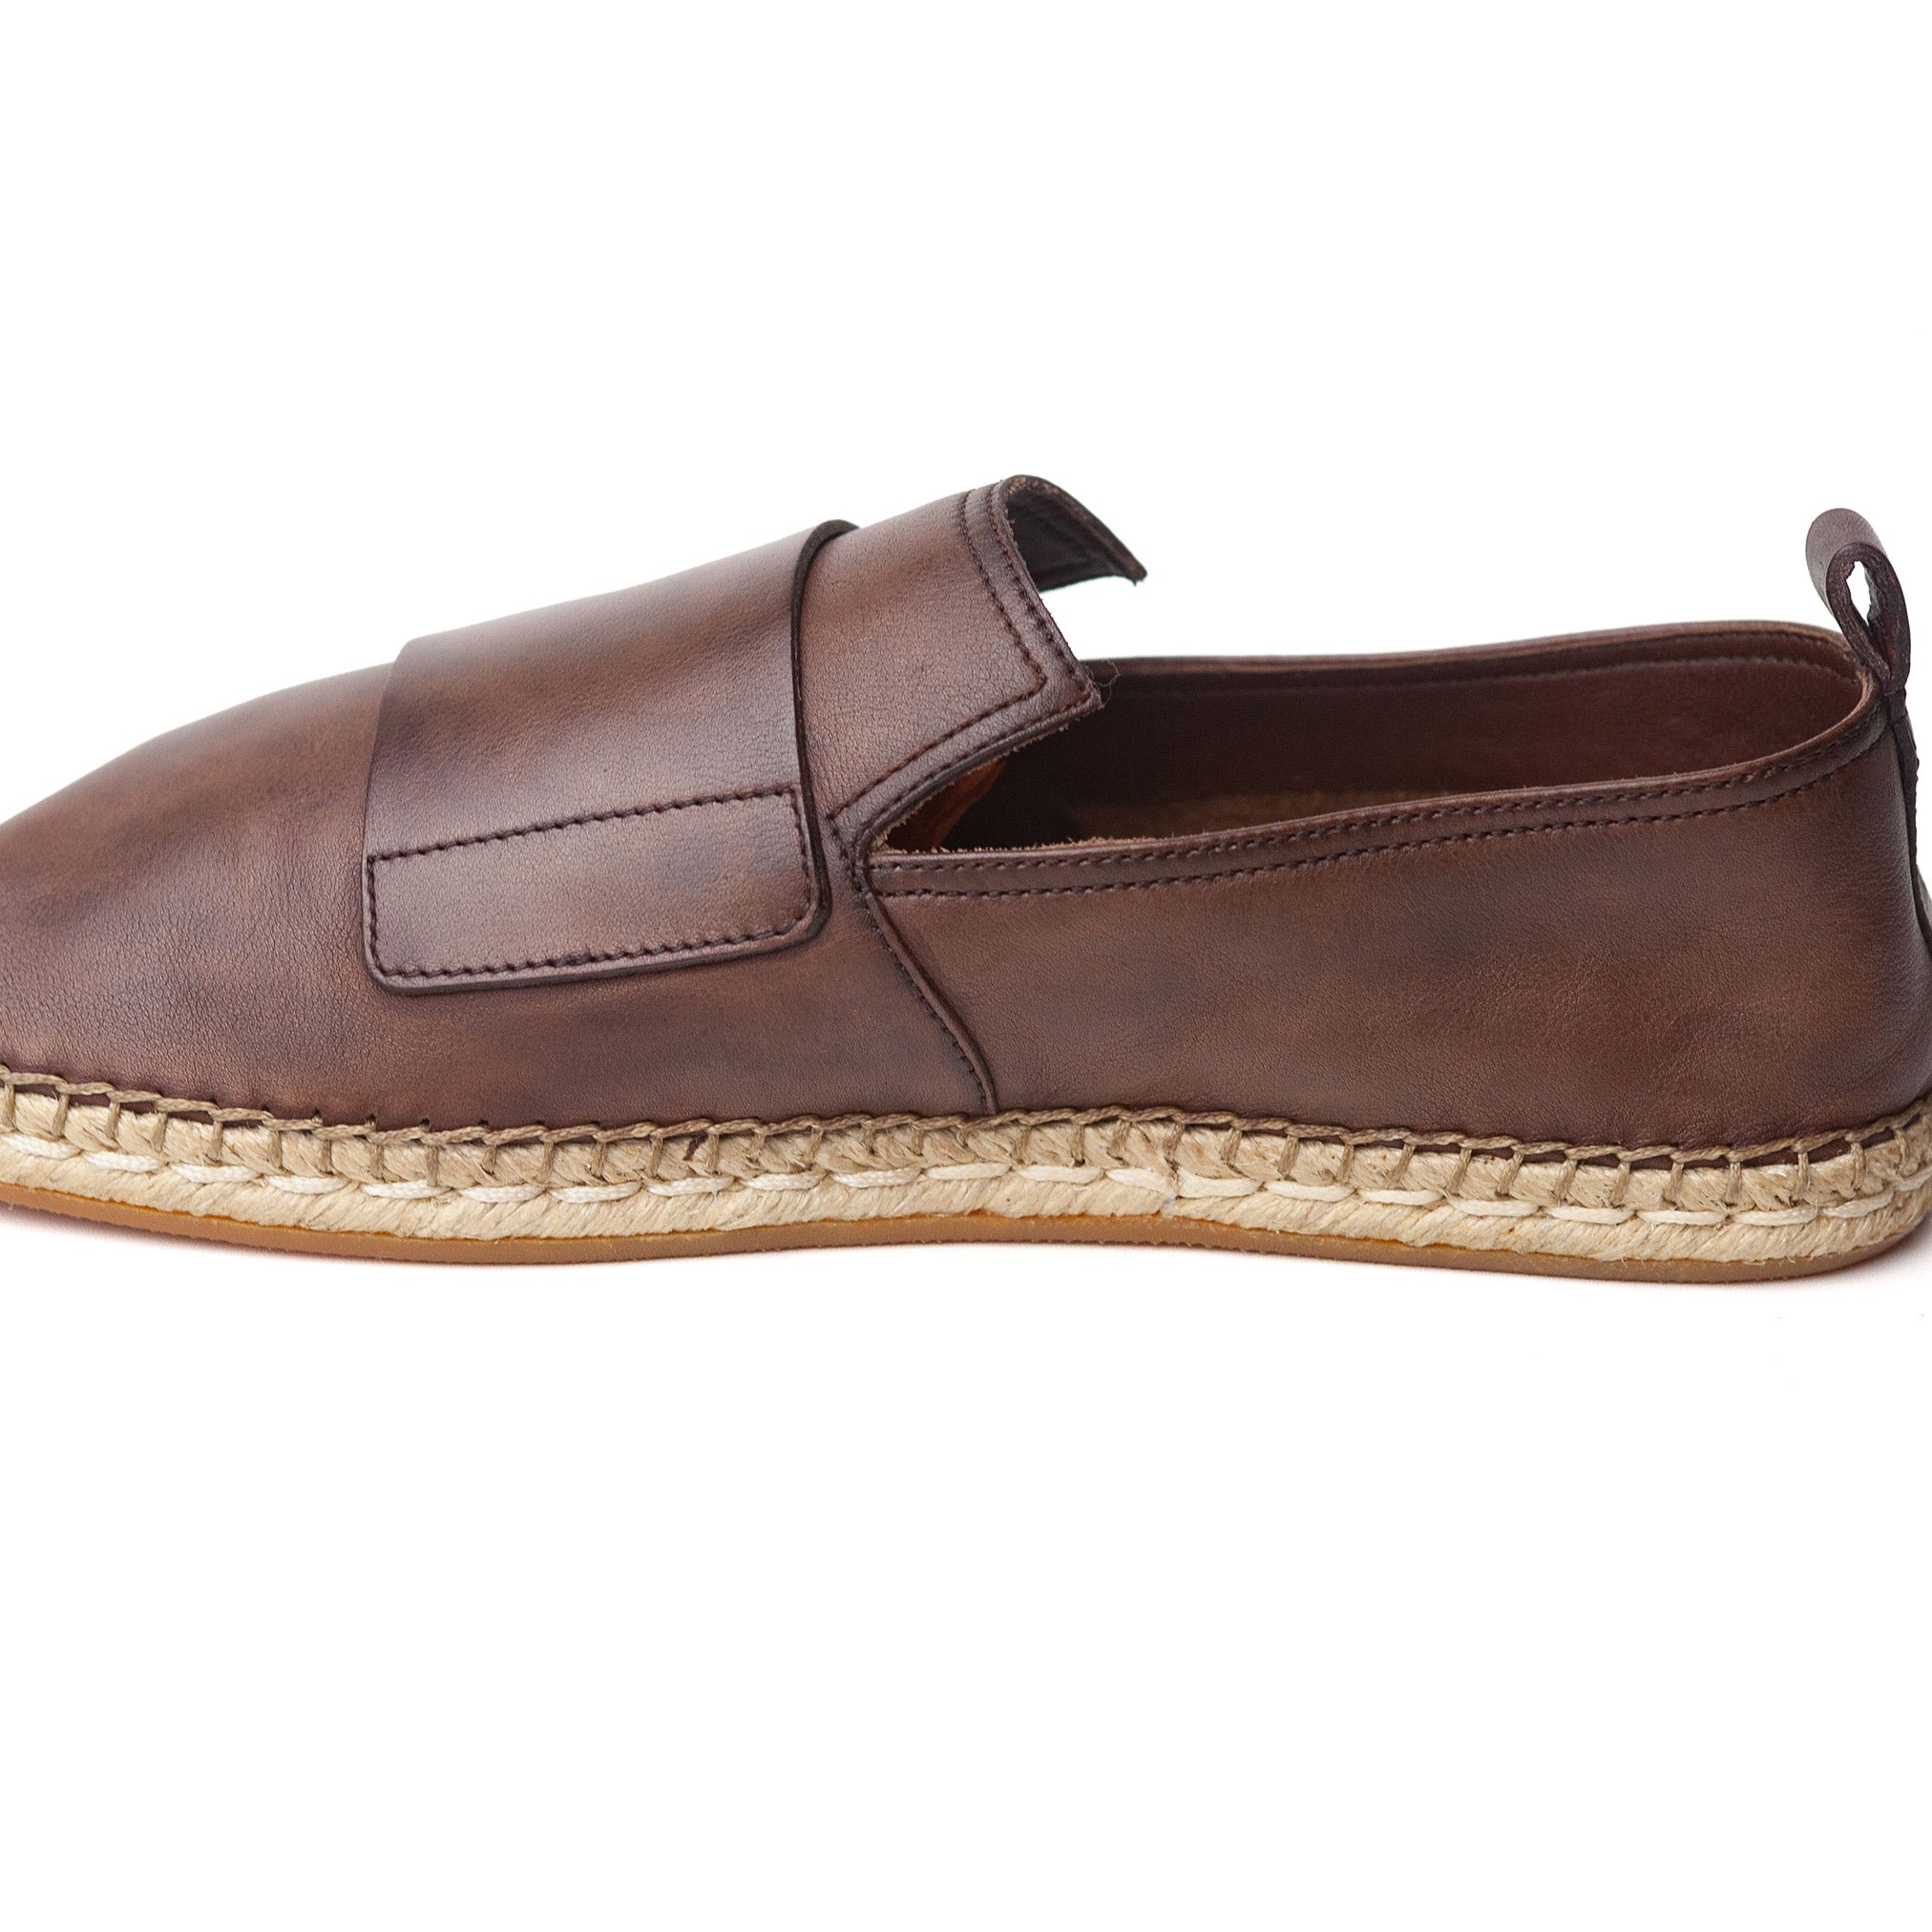 Brown Leather Espadrilles (41.5)